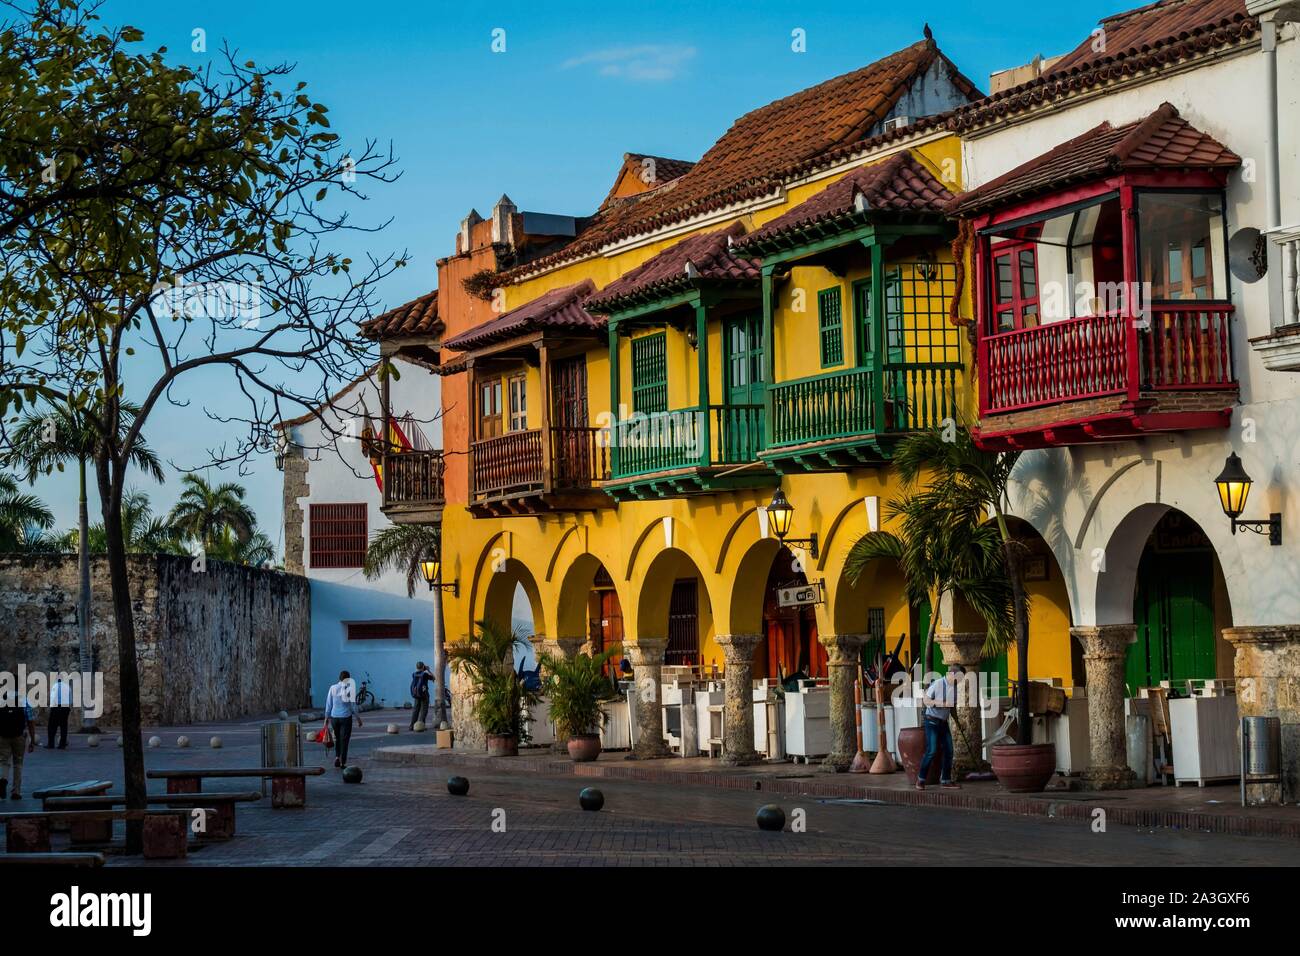 Colombia, Bolivar Department, Cartagena of the Indies, colonial center registered World Heritage bu UNESCO, Plaza de los Coches Stock Photo